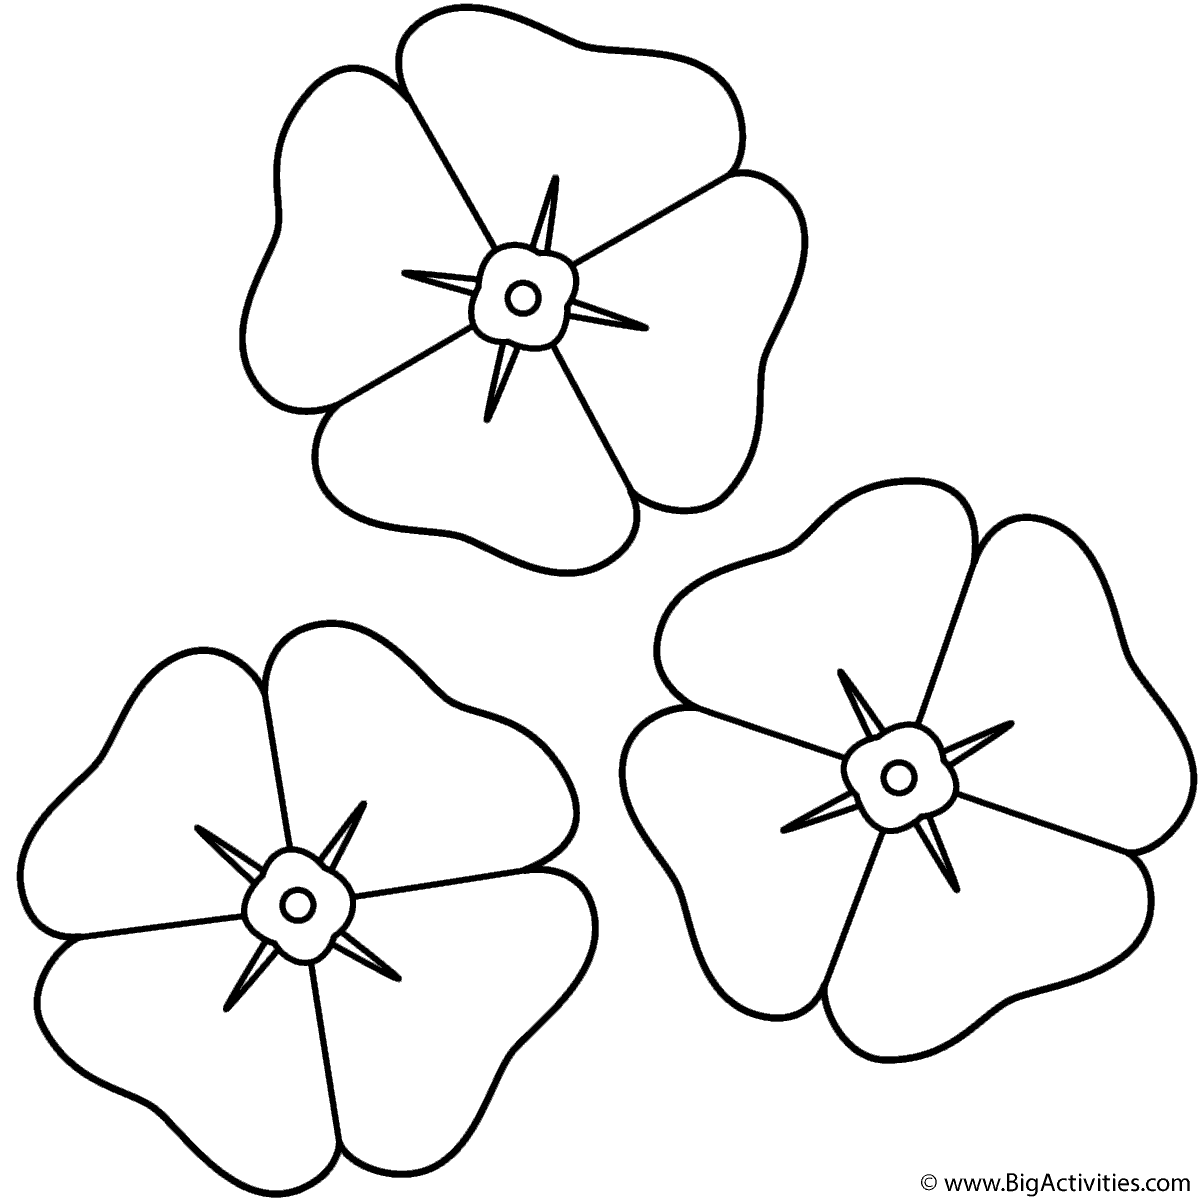 Download Poppies - Coloring Page (Plants)